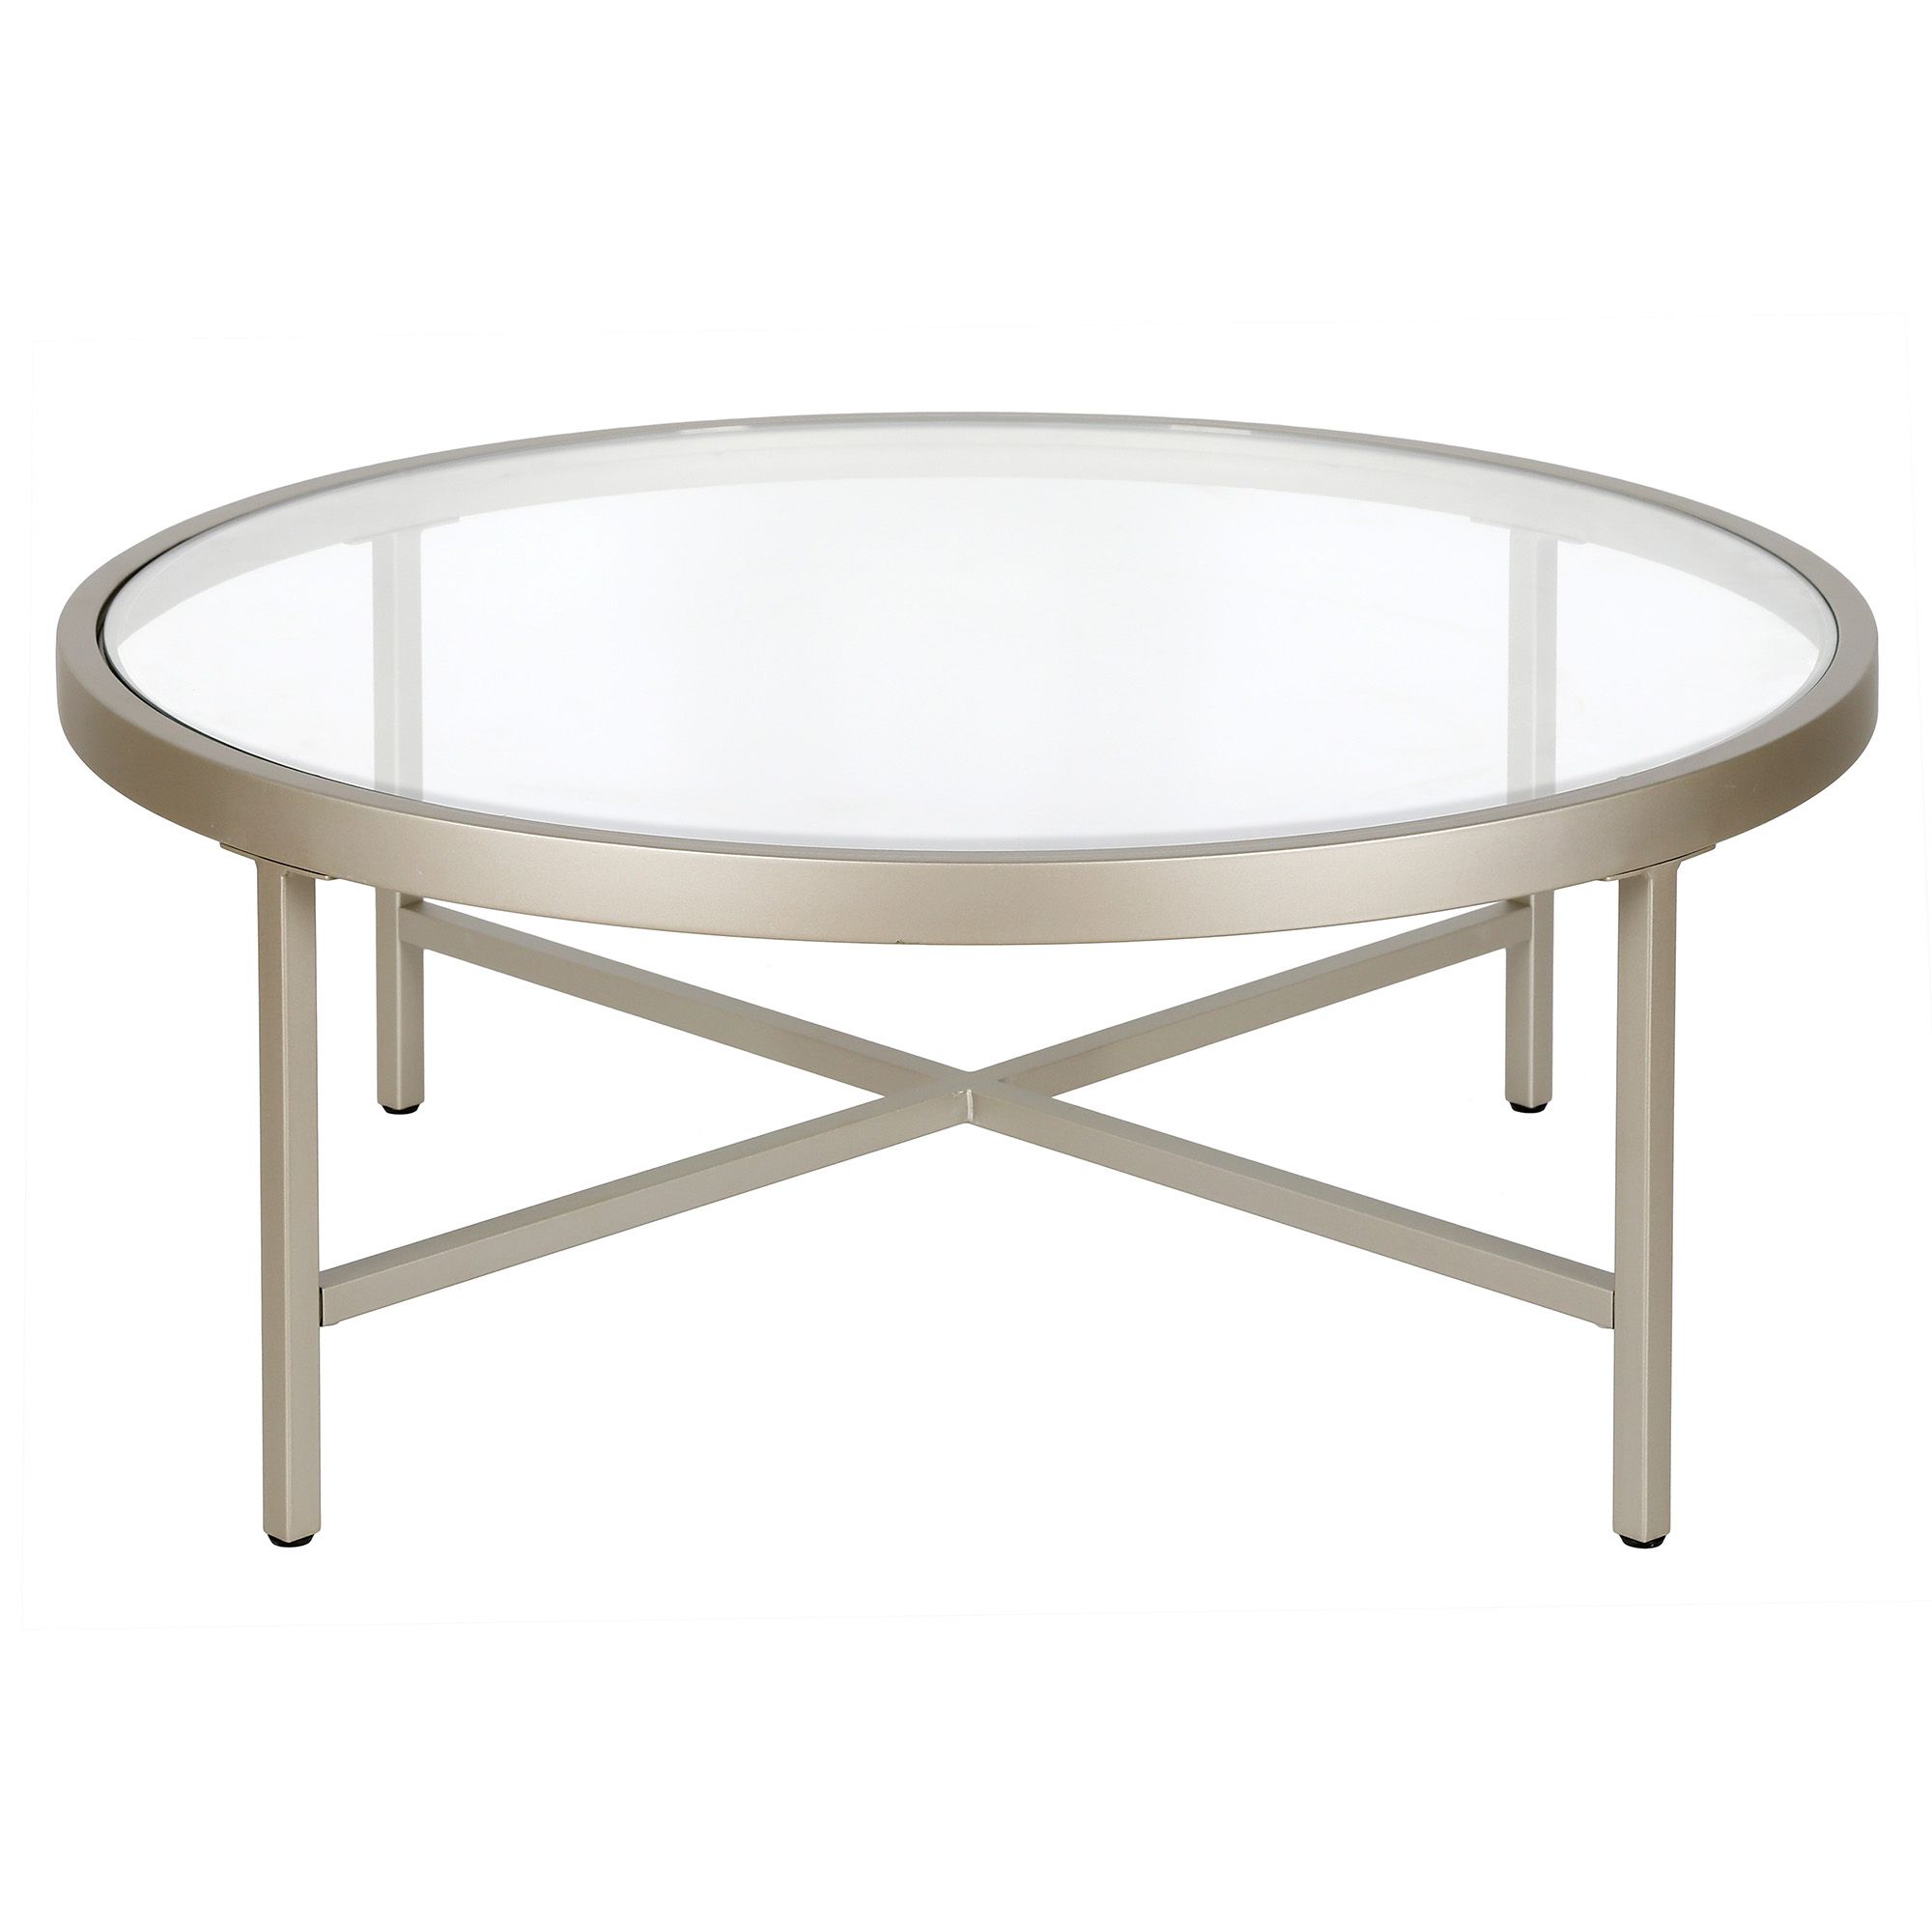 Most Current Geometric Glass Modern Coffee Tables Regarding Evelyn&zoe Contemporary Round Coffee Table With Glass Top (Gallery 11 of 20)